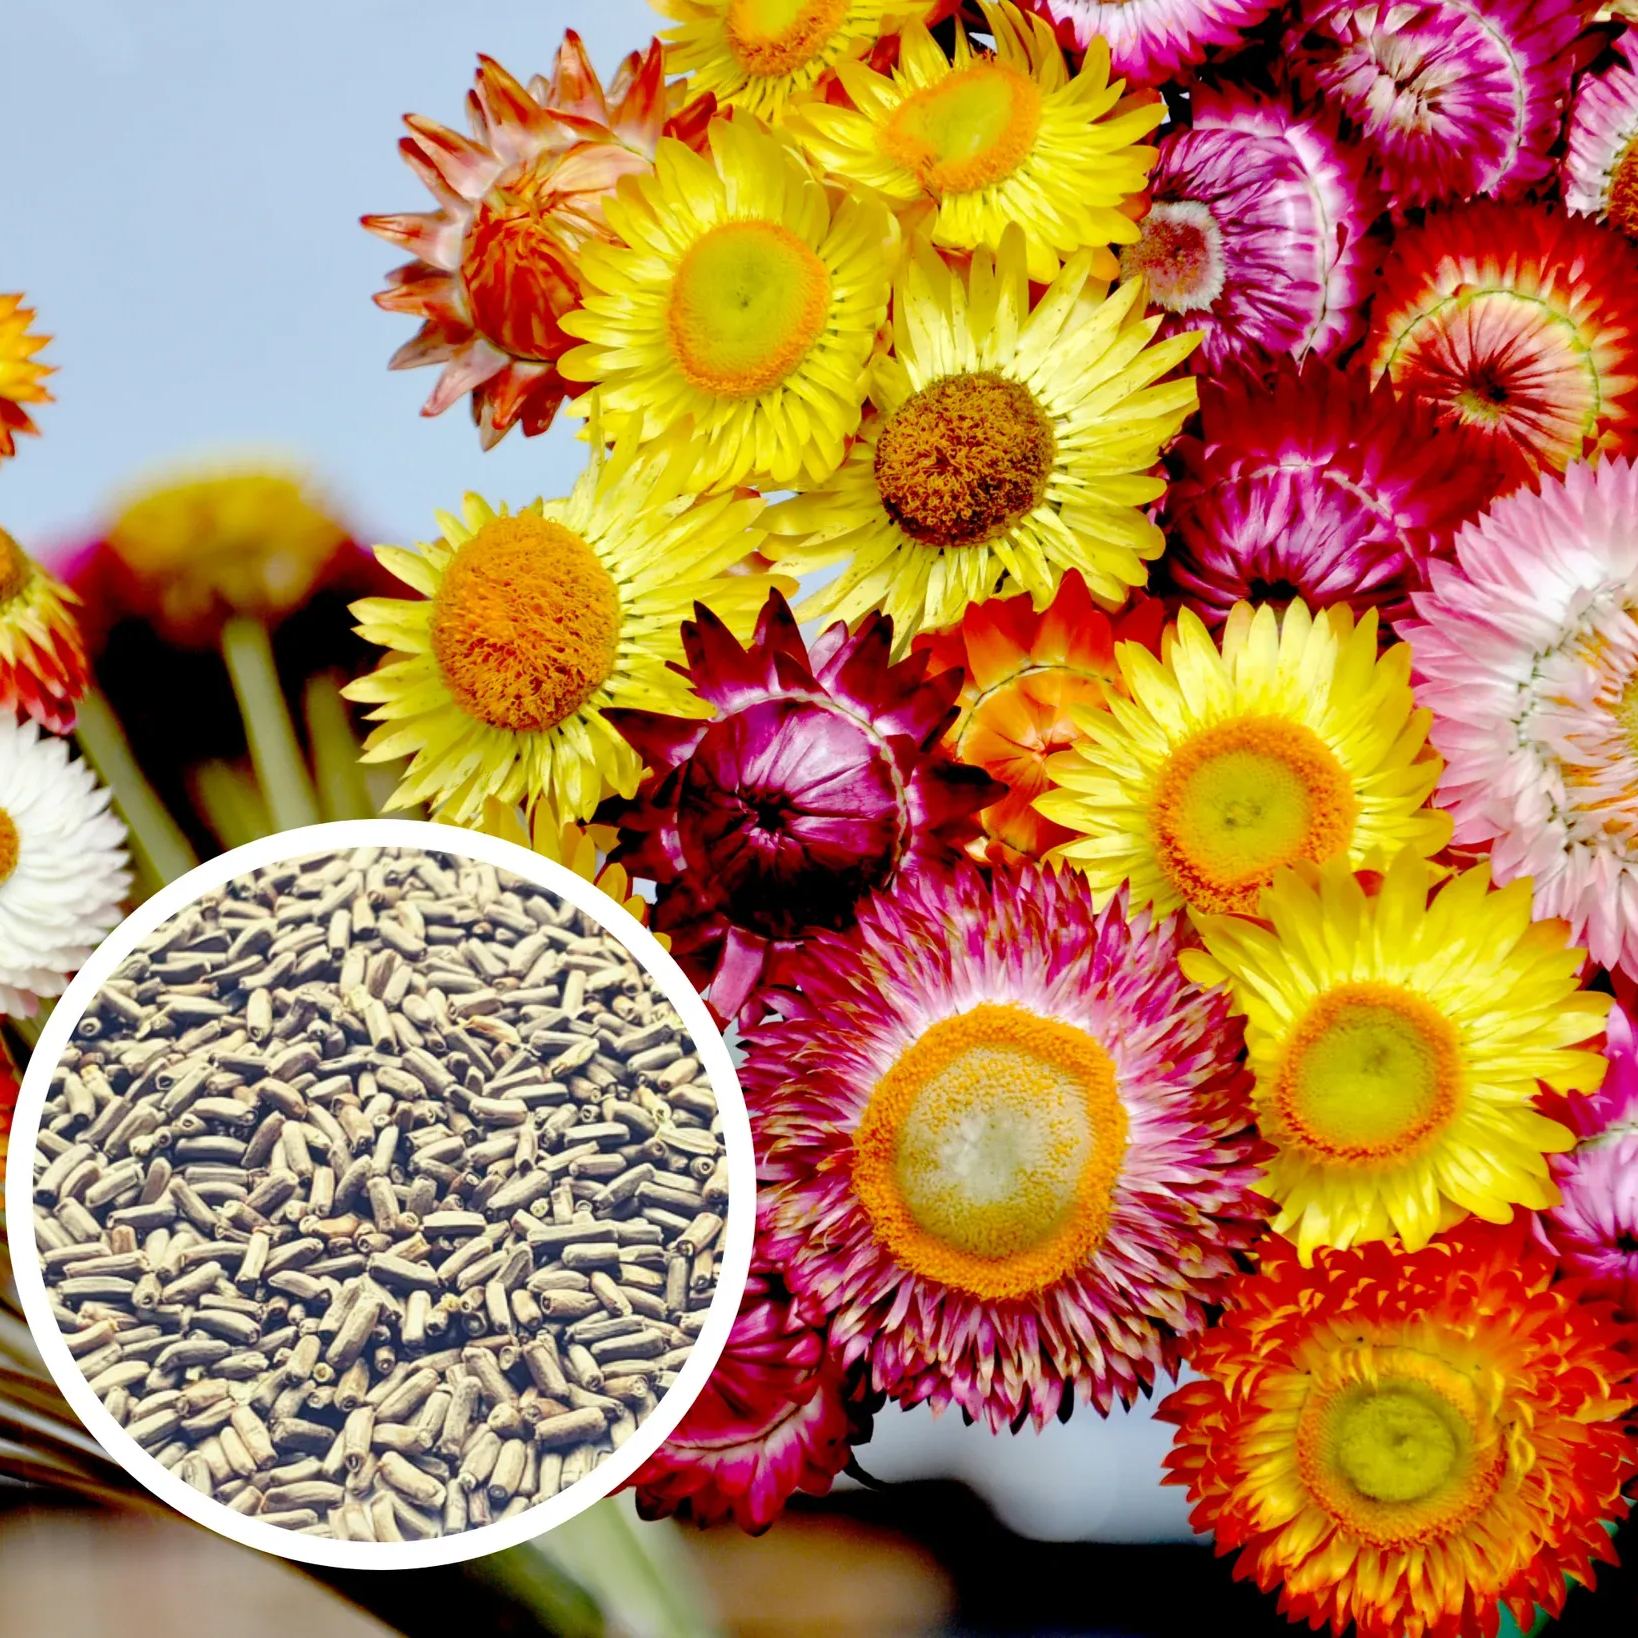 Mixed Helichrysum Seeds-Drought Tolerant Annual Plant